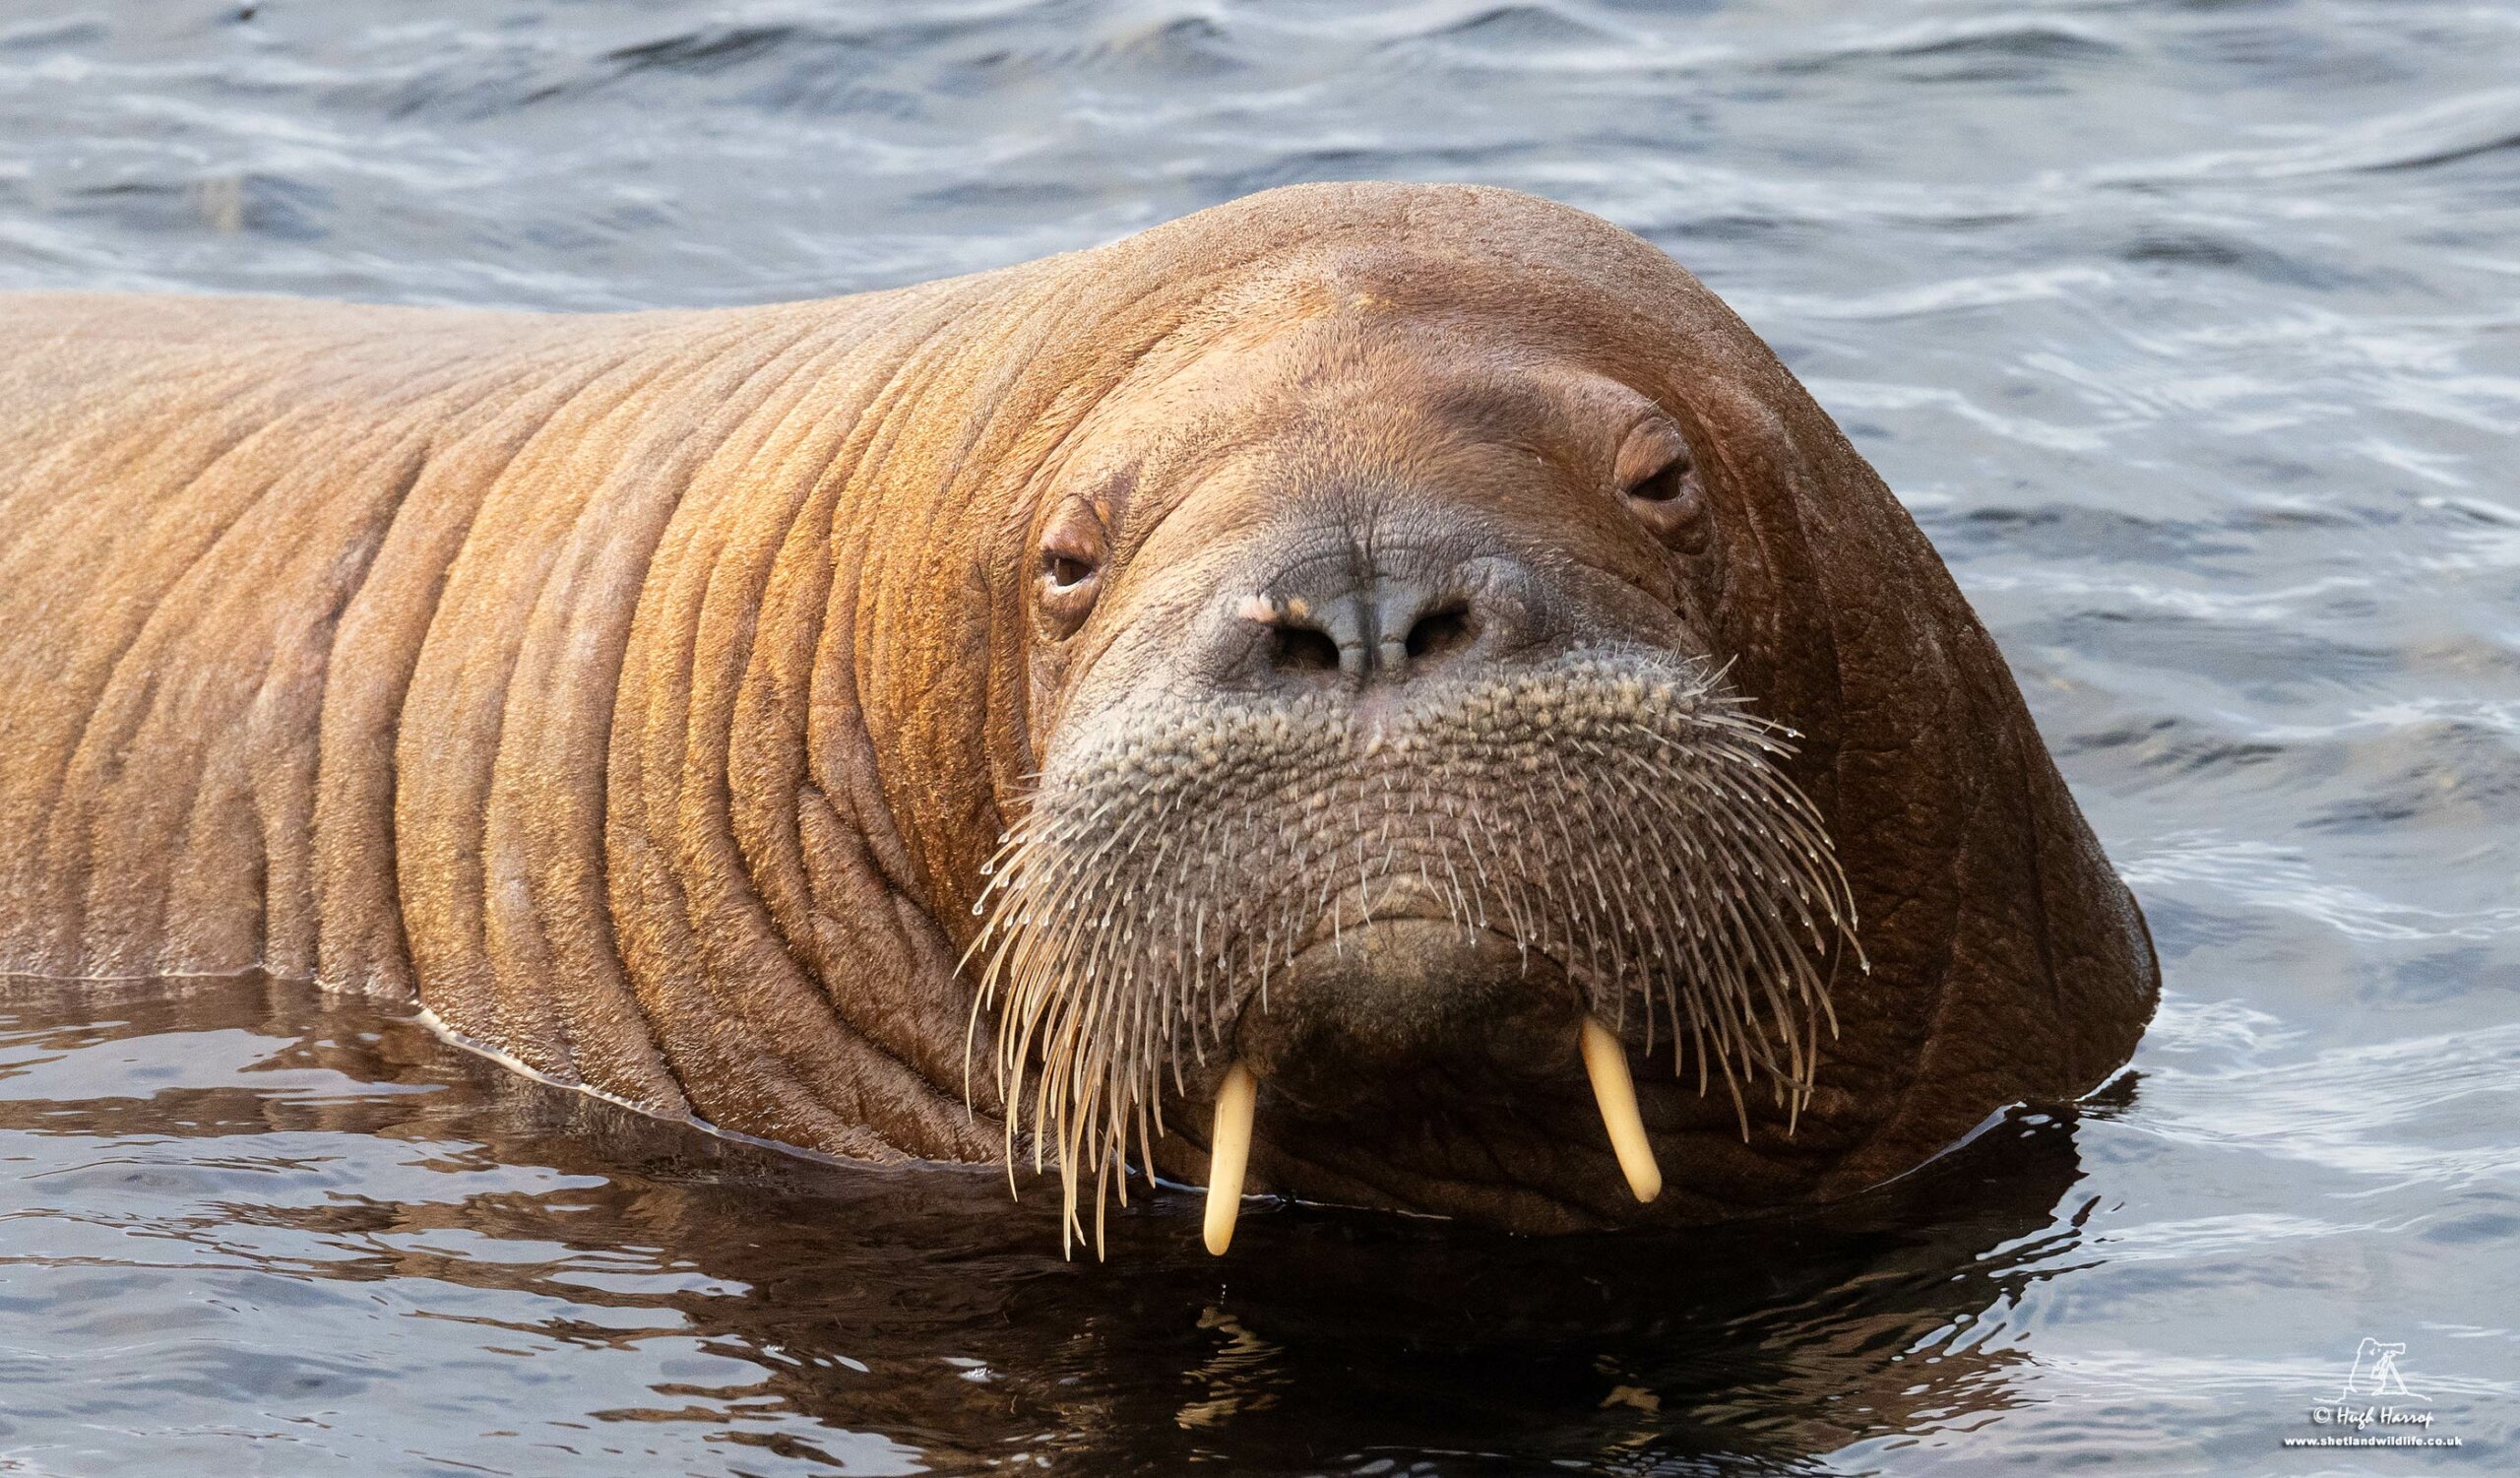 Local fury after Freya the walrus put down in Norway | Shetland News